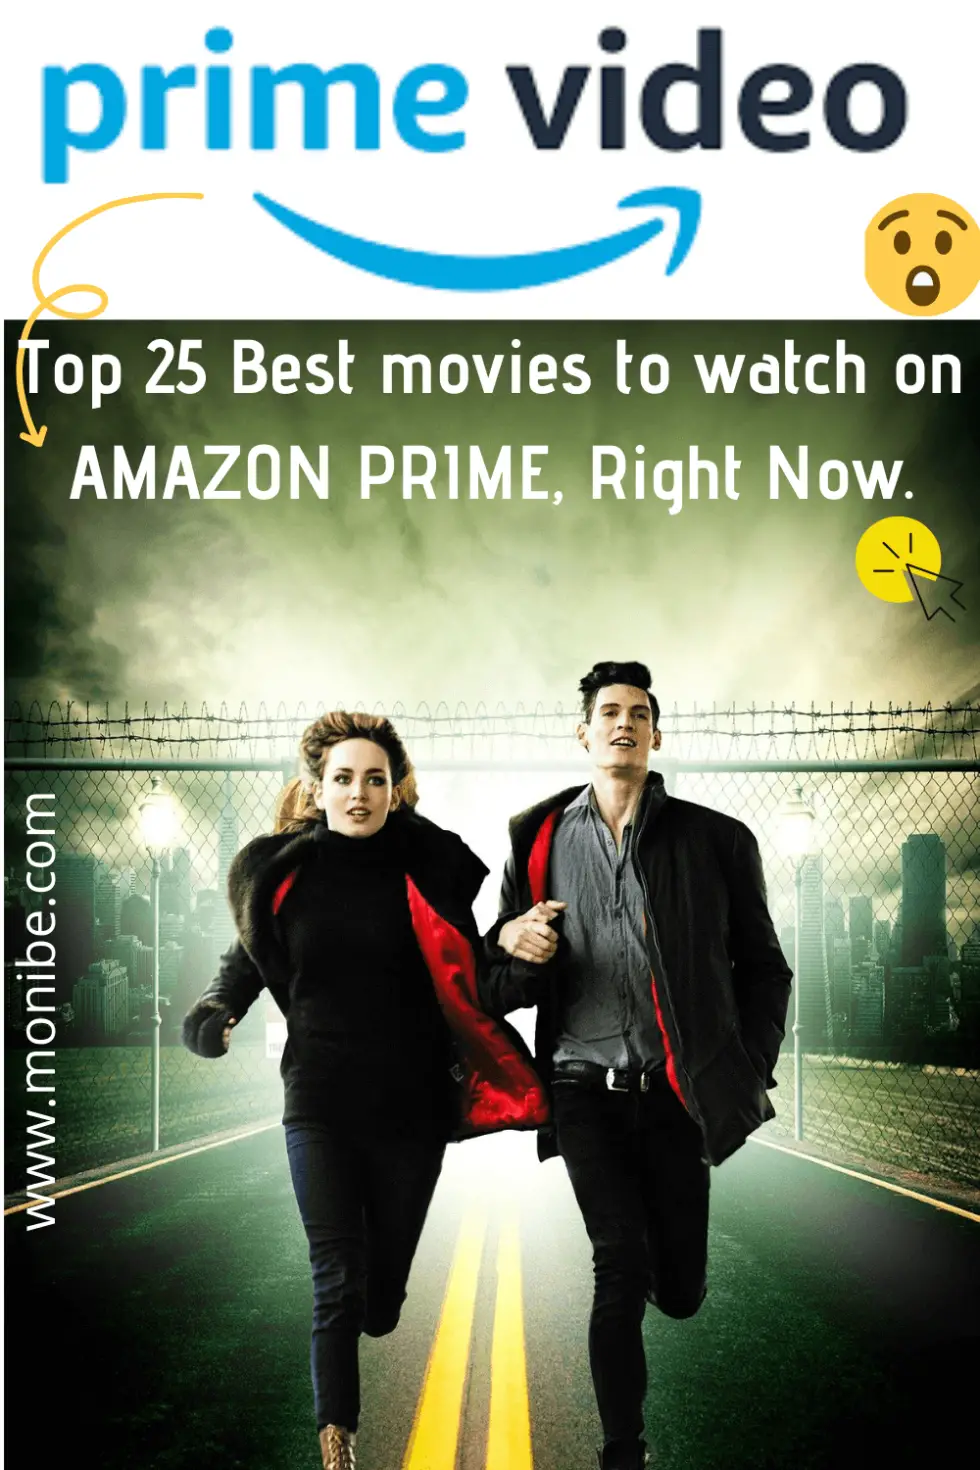 Top 25 Amazon Prime Movies to Watch Right Now.